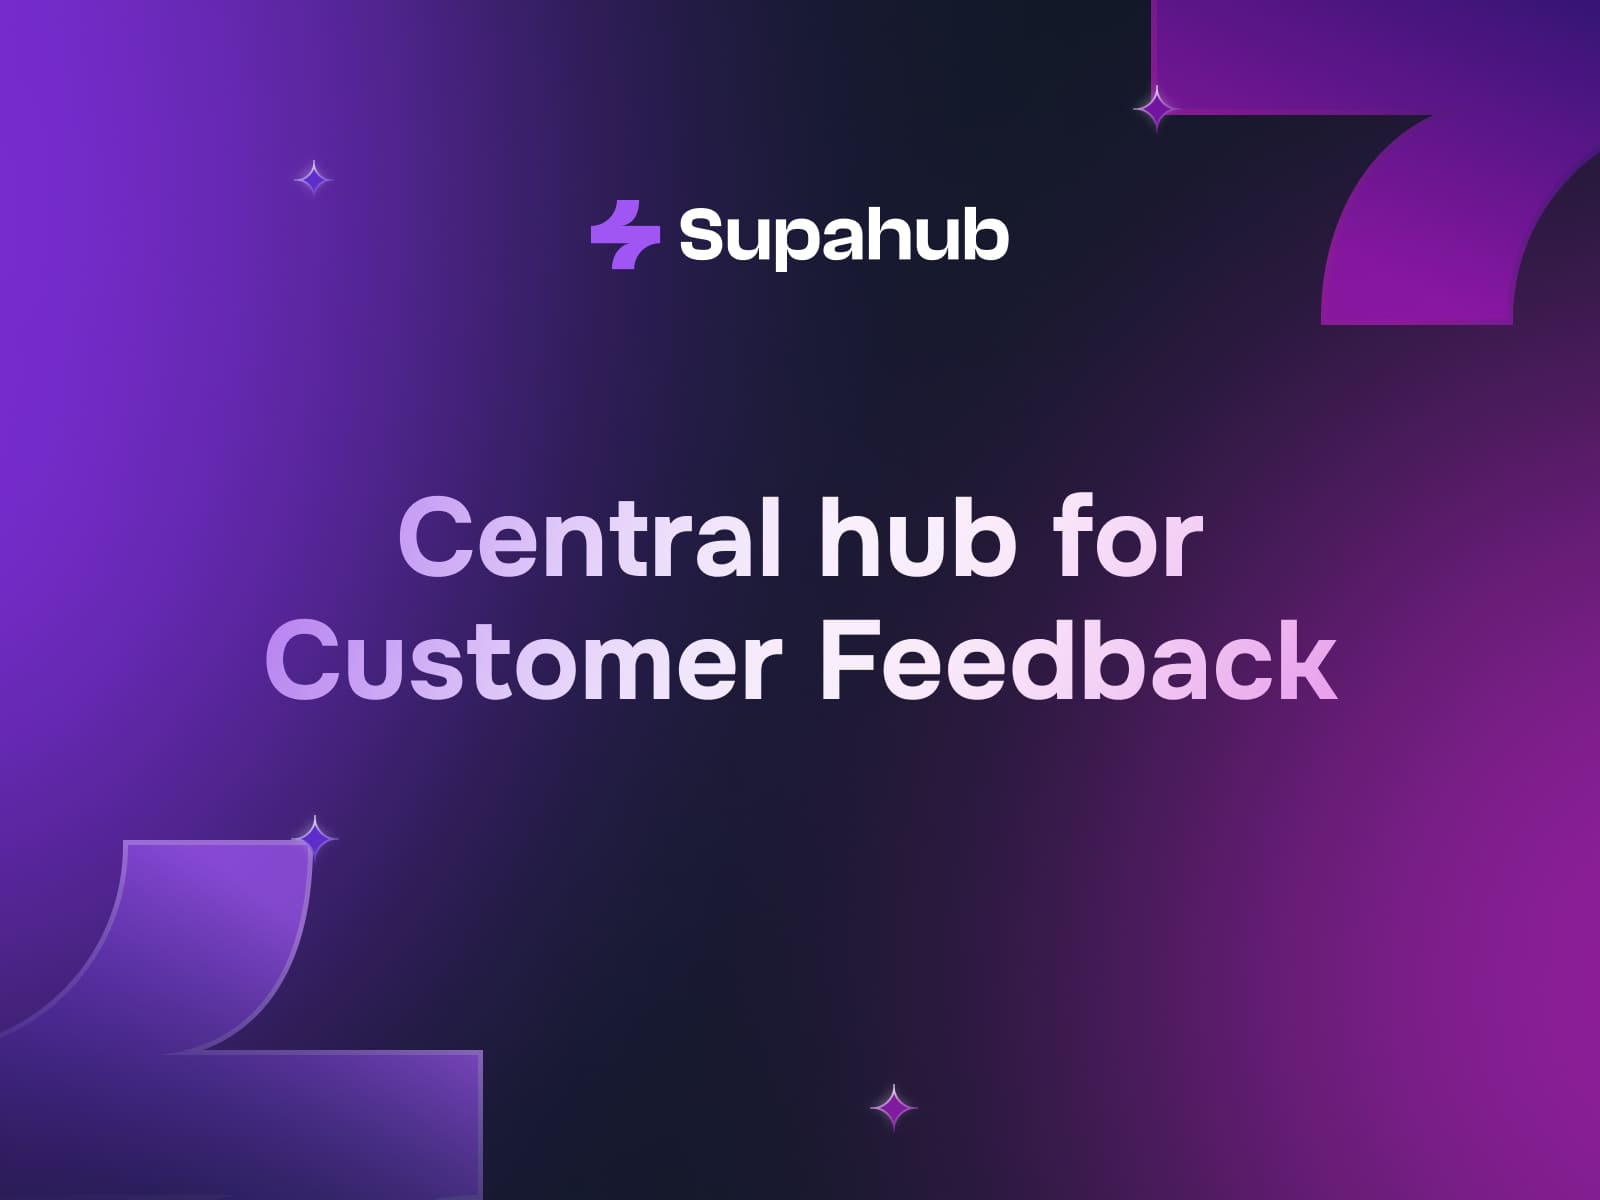 Central hub to collect feedback and announce product updates